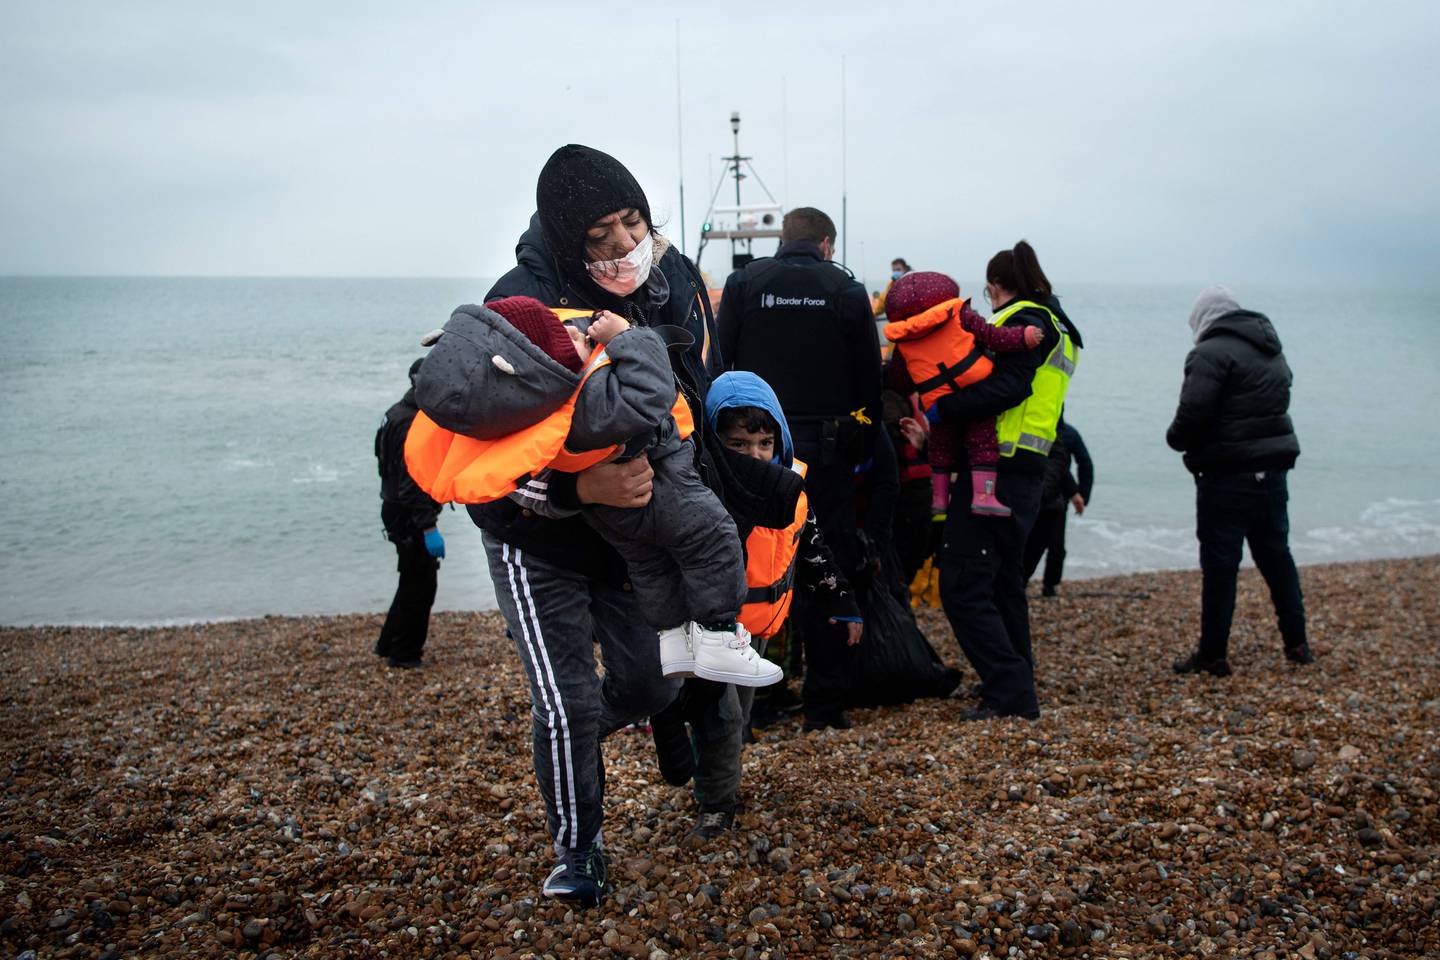 A migrant and her children after being helped ashore from an RNLI  lifeboat at a beach in Dungeness, on the south-east coast of England last month. AFP